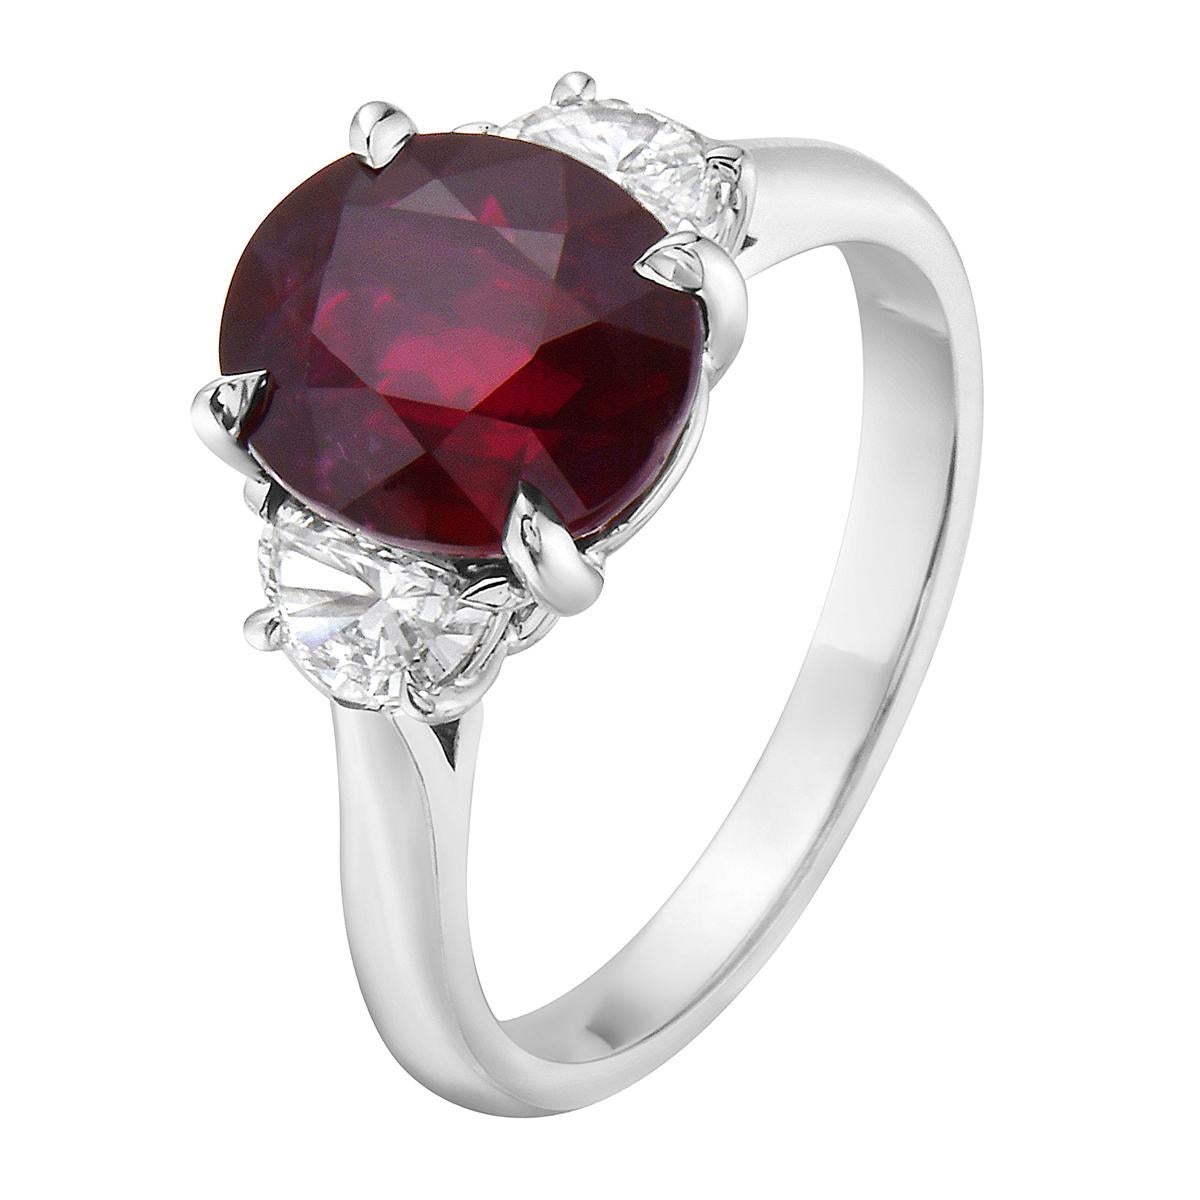 With this exquisite diamond and ruby ring, style and glamour are in the spotlight. This is an 18-karat diamond and ruby ring which is adorned with VS2, G color diamonds, made out of 2 half-moon-shaped diamonds totaling 0.44 carats, and 1 oval-shaped